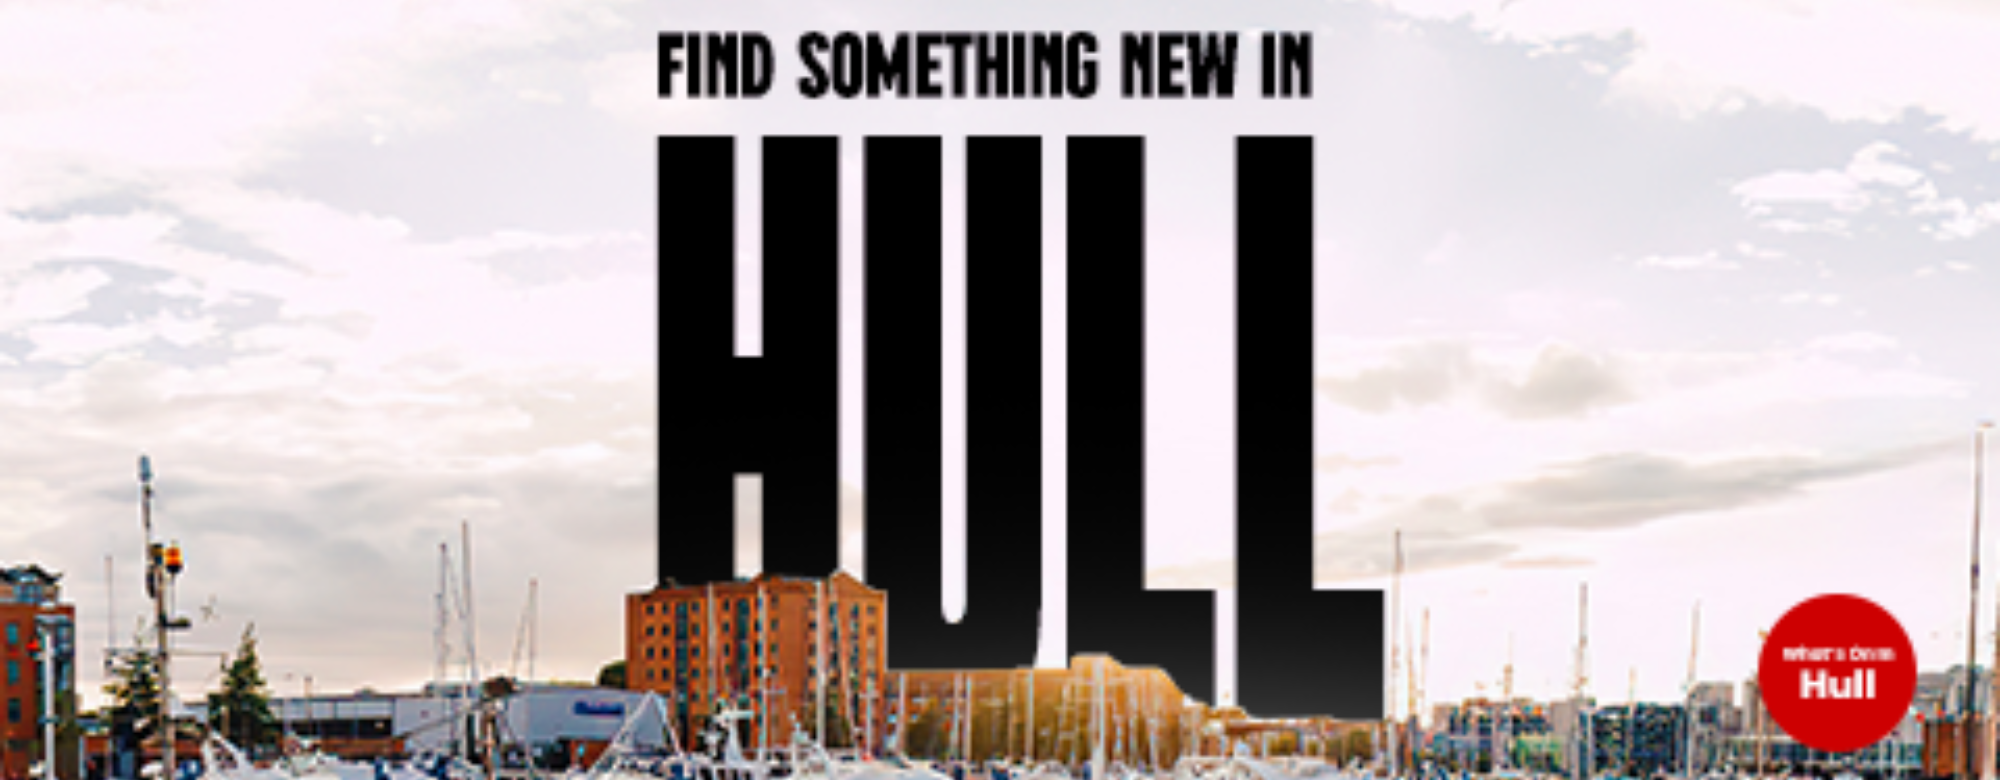 Whats On In Hull